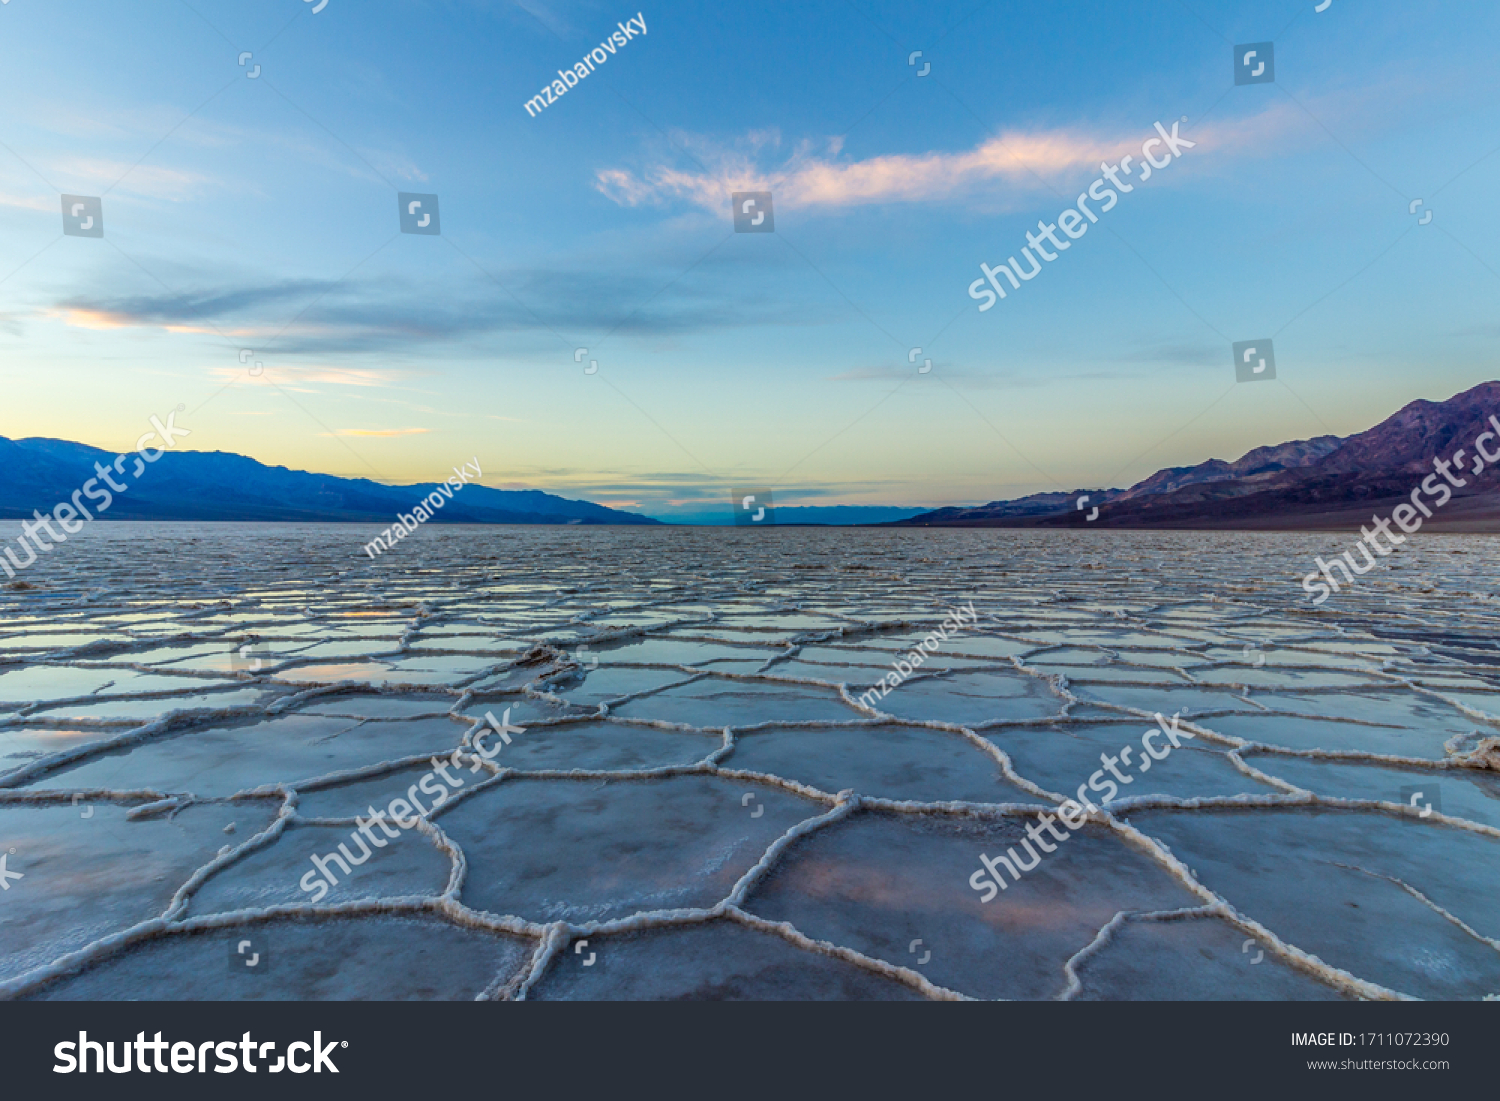 Badwater Basin at Sunset. Salt Crust and Clouds Reflection. Death Valley National Park. California, USA #1711072390